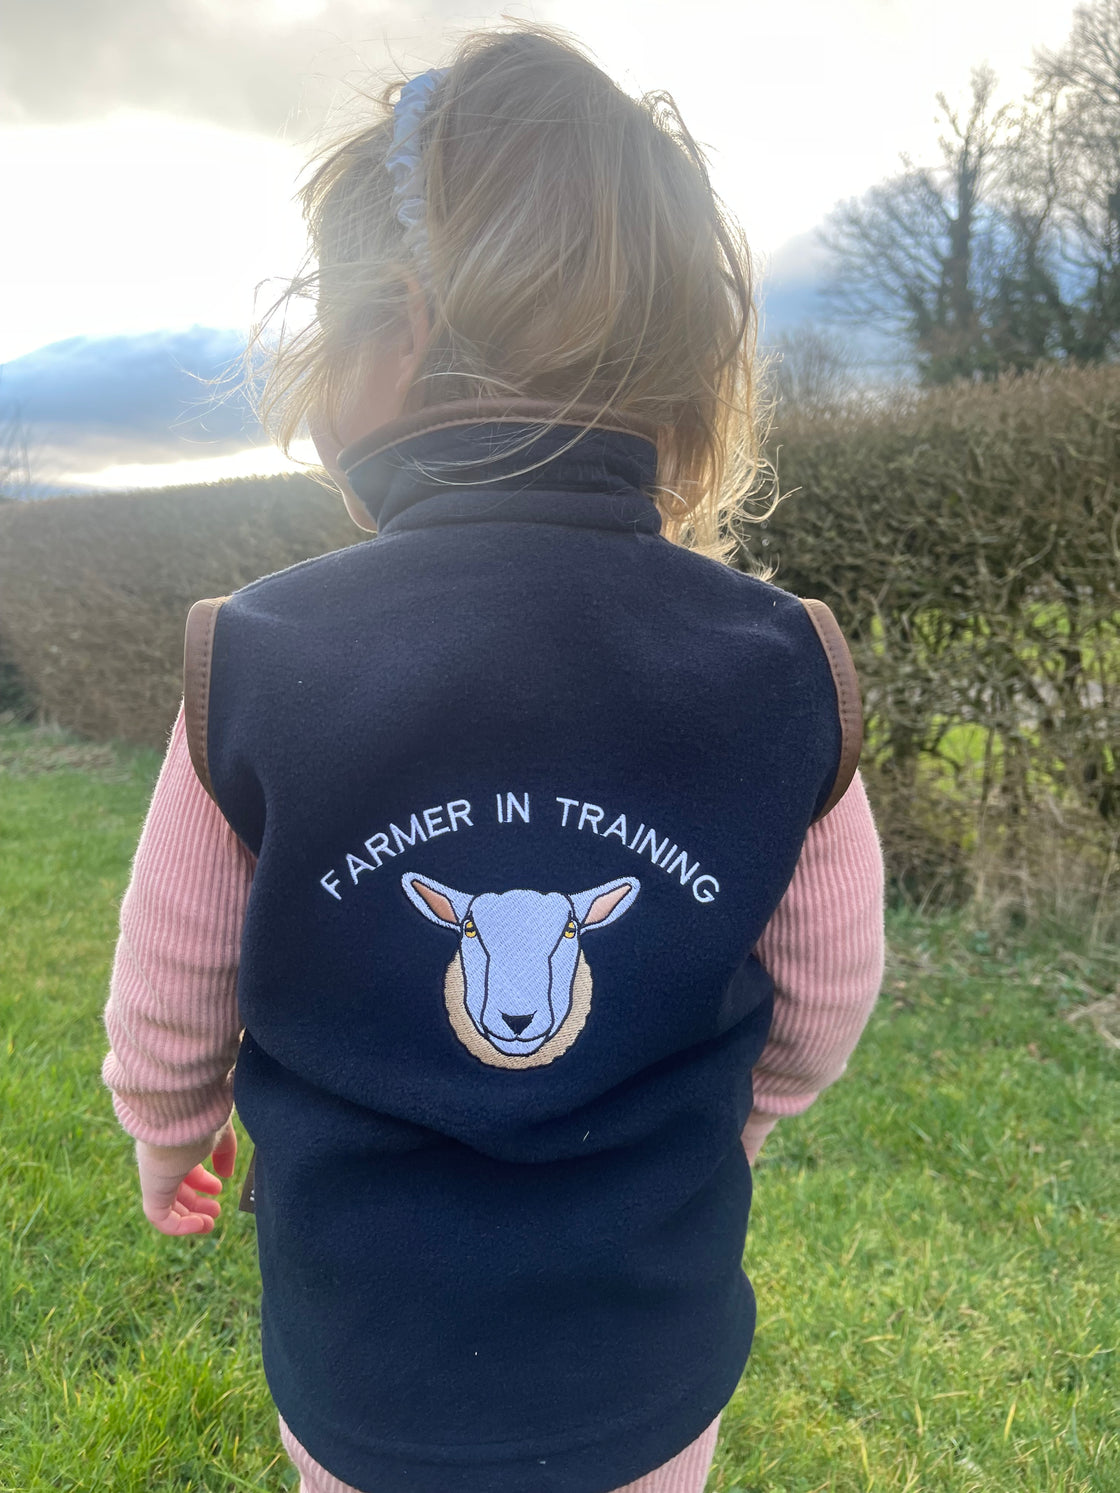 Fleece gilet embroidered with Farmer In Training Design